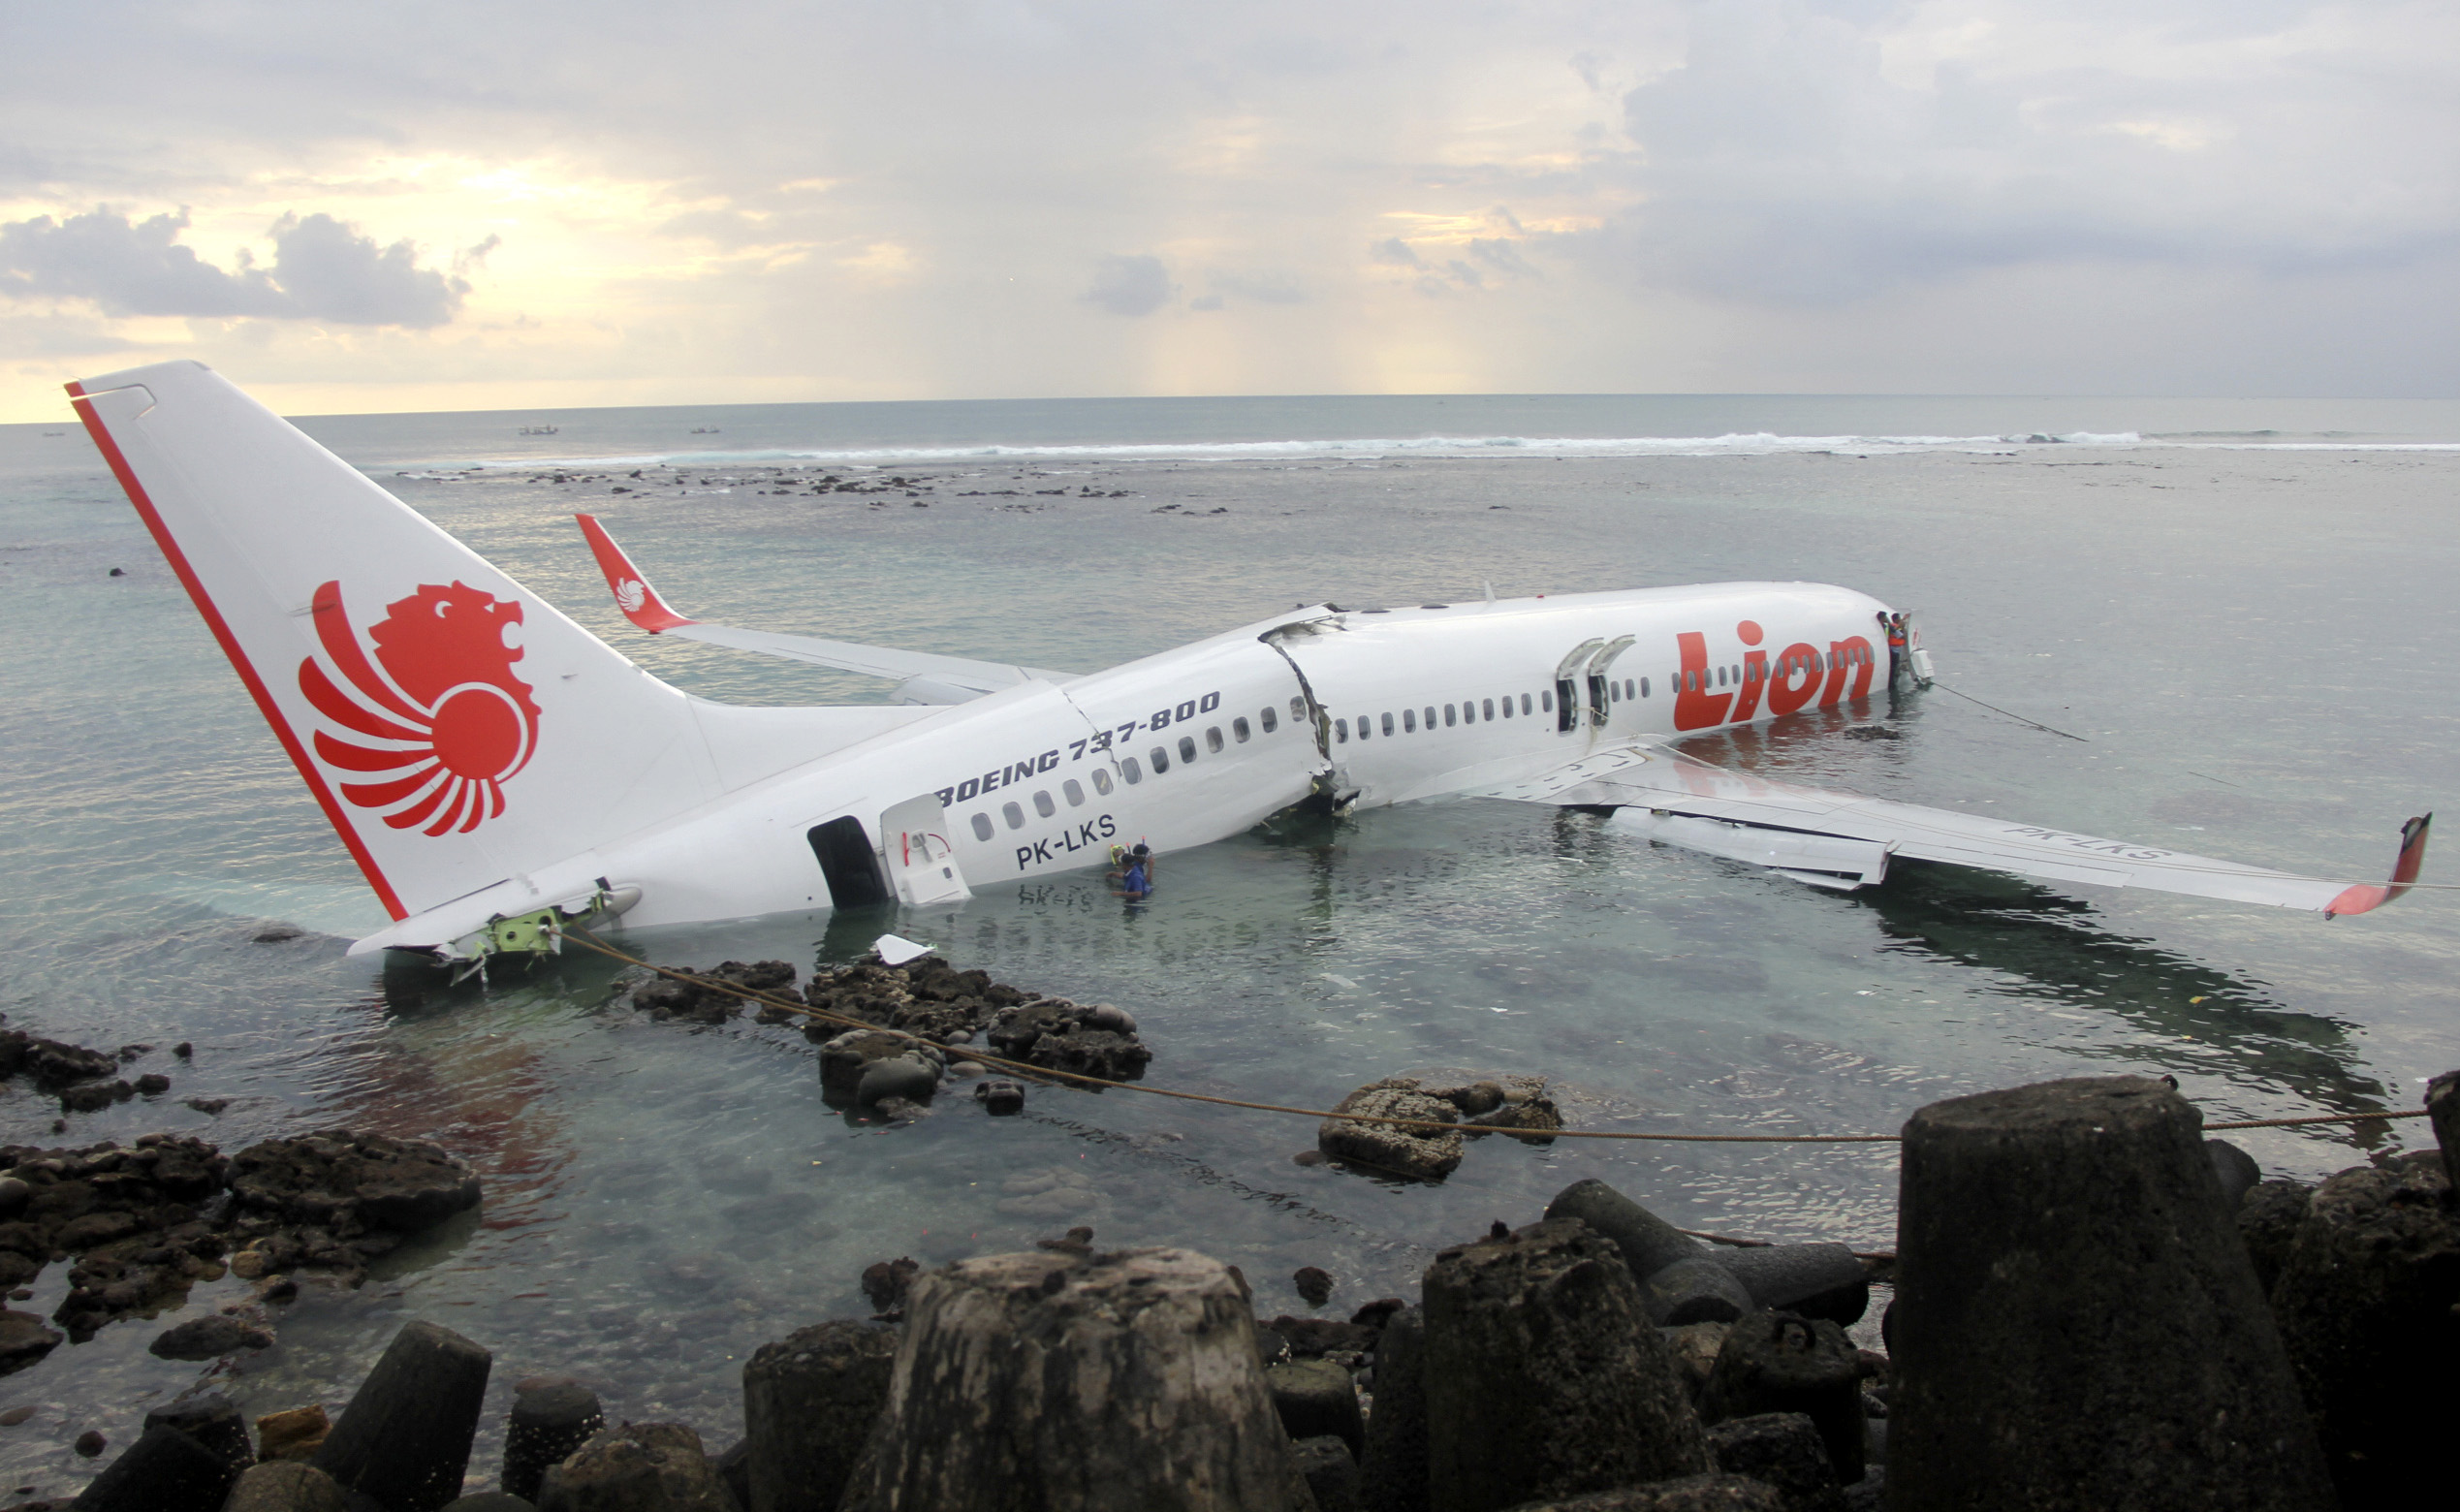 Bali, Indonesia - Miraculously, All 108 On Board Survive.